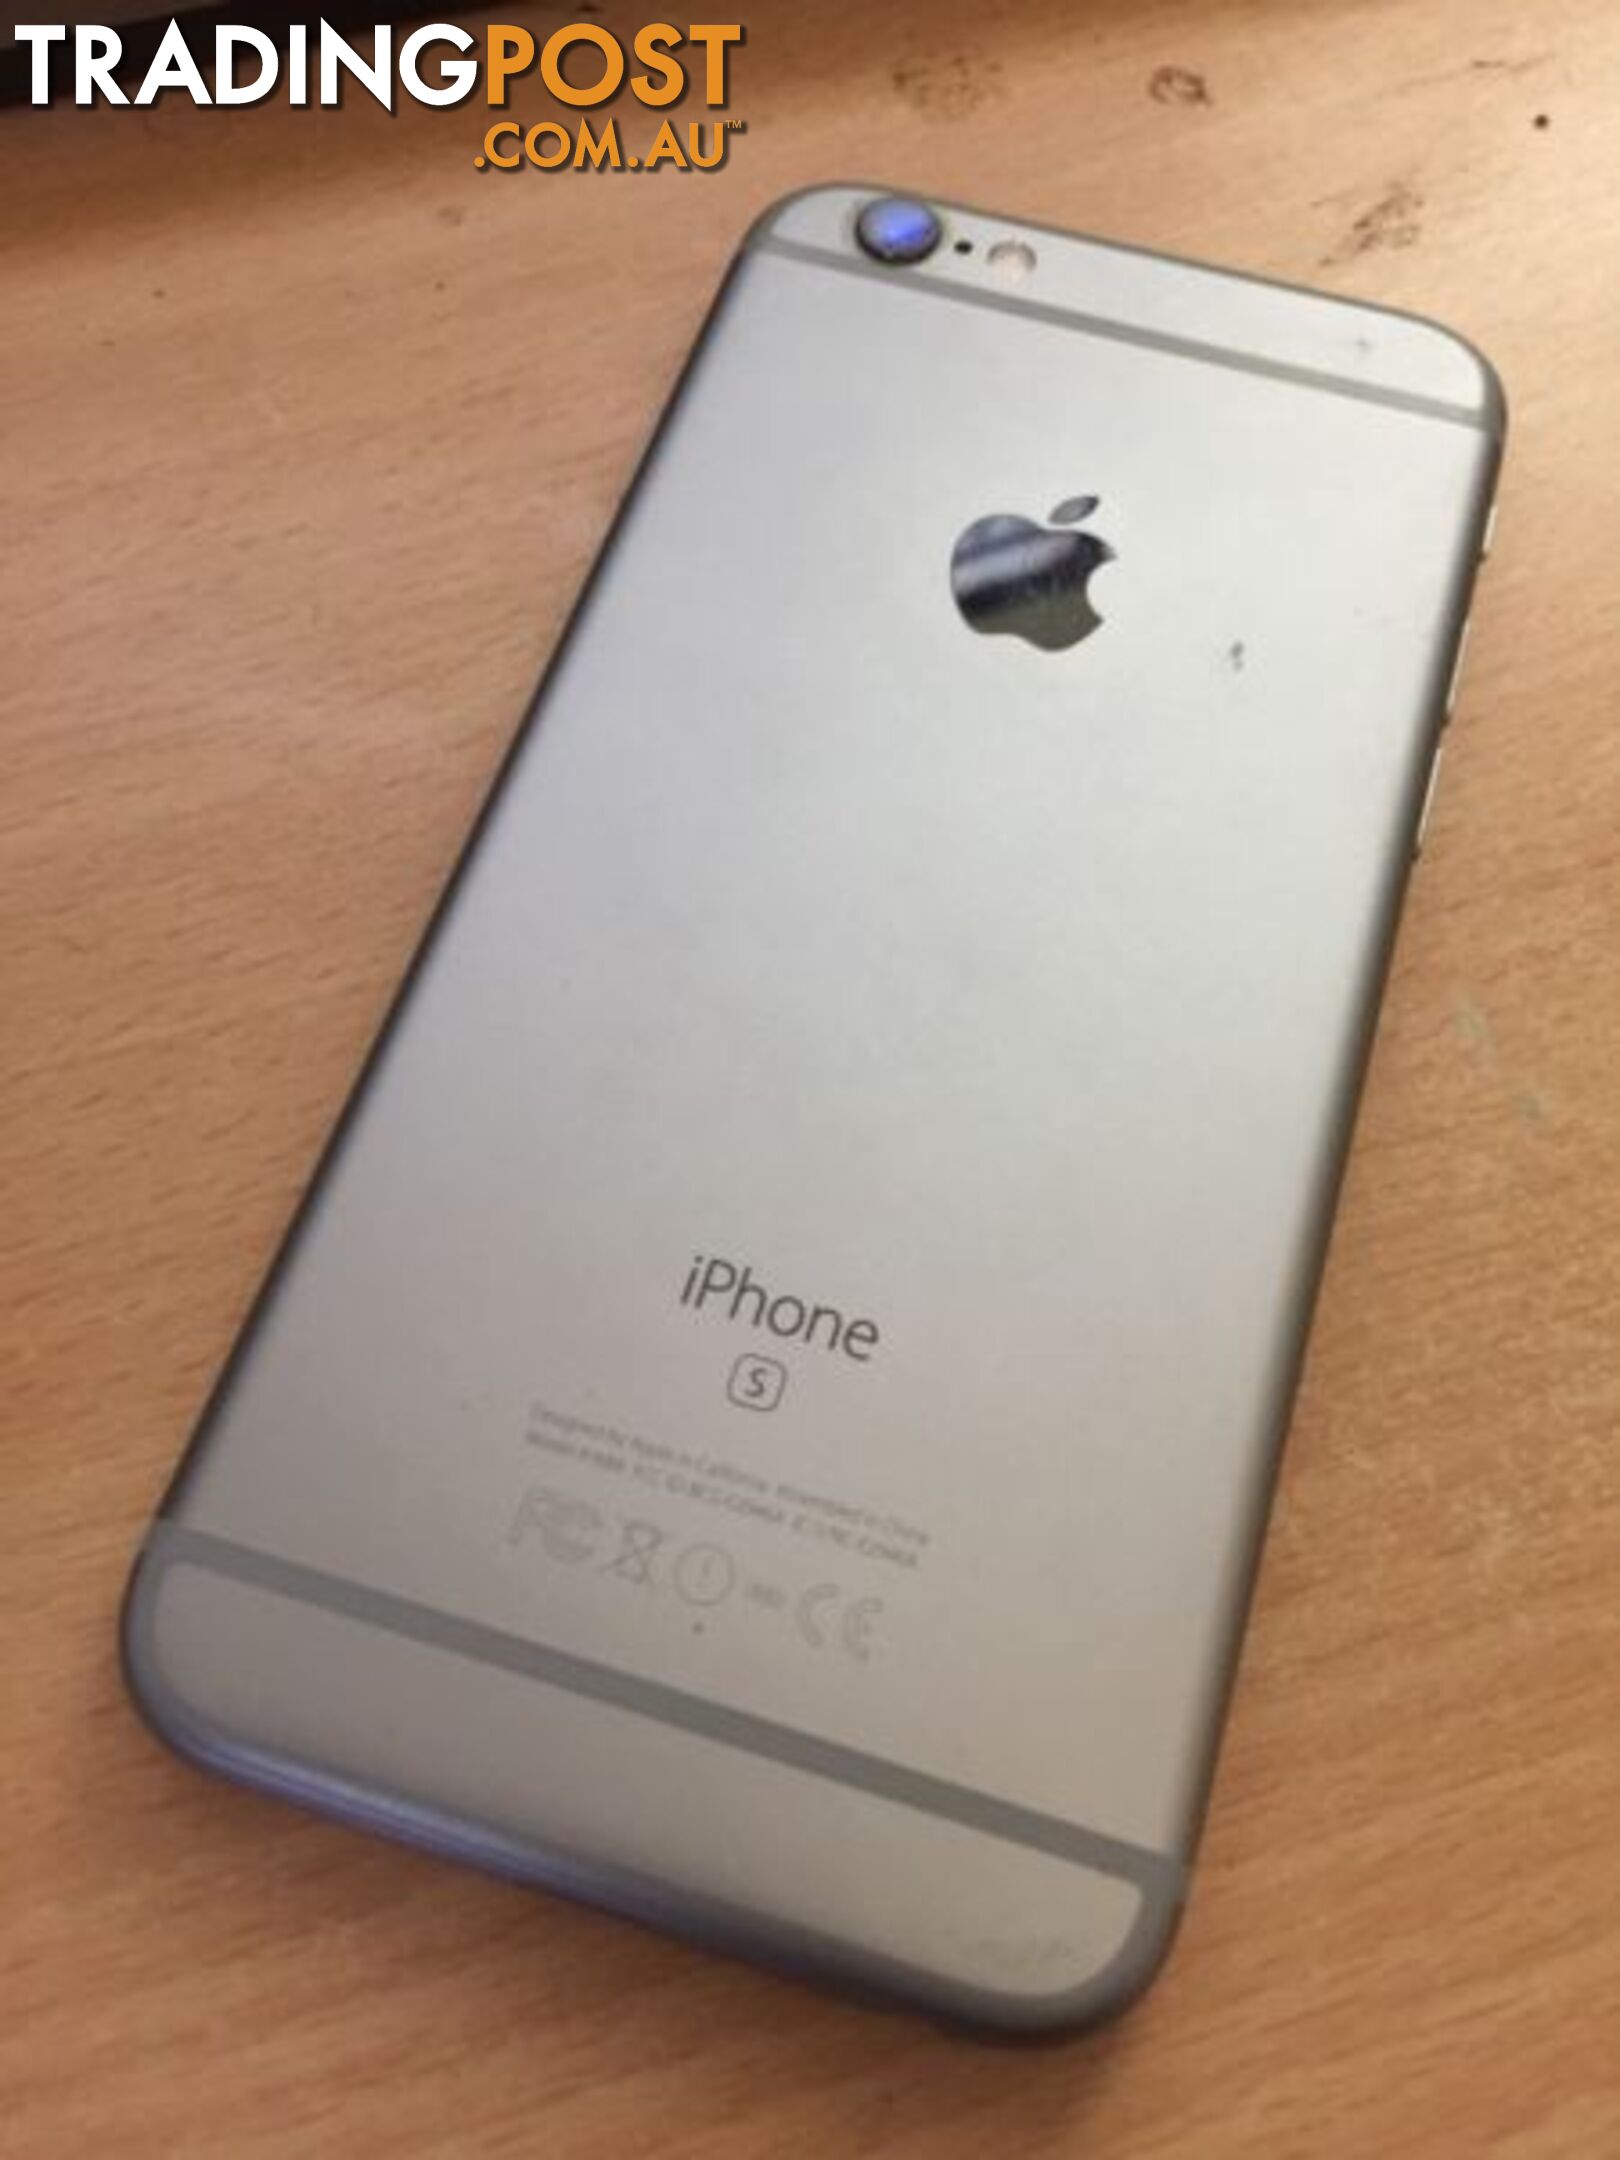 Apple iPhone 6s - as new - purchased for parts